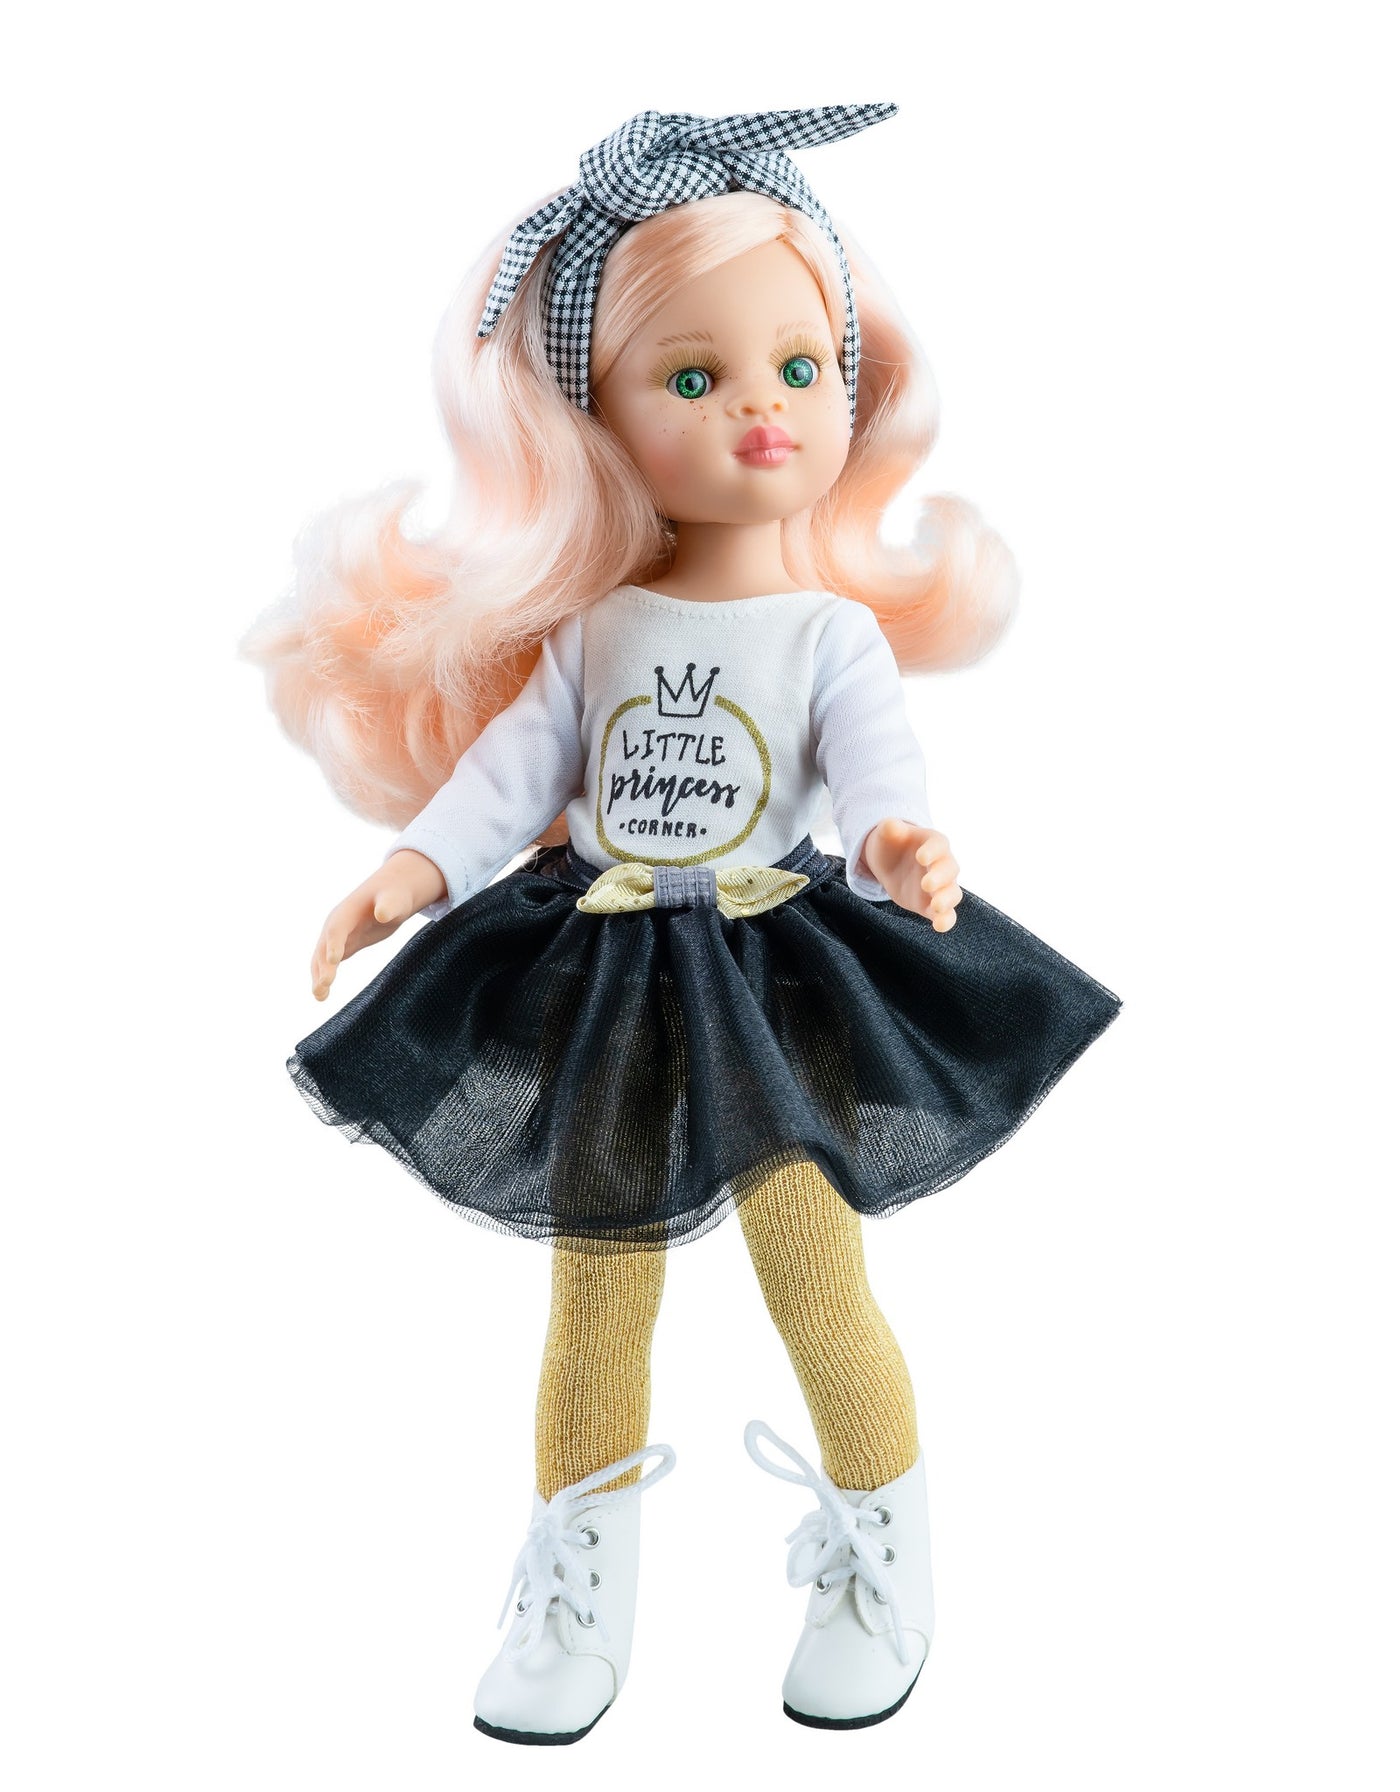 Las Amigas Doll - Nieves with white sweater and black skirt Little princess - Paola Reina